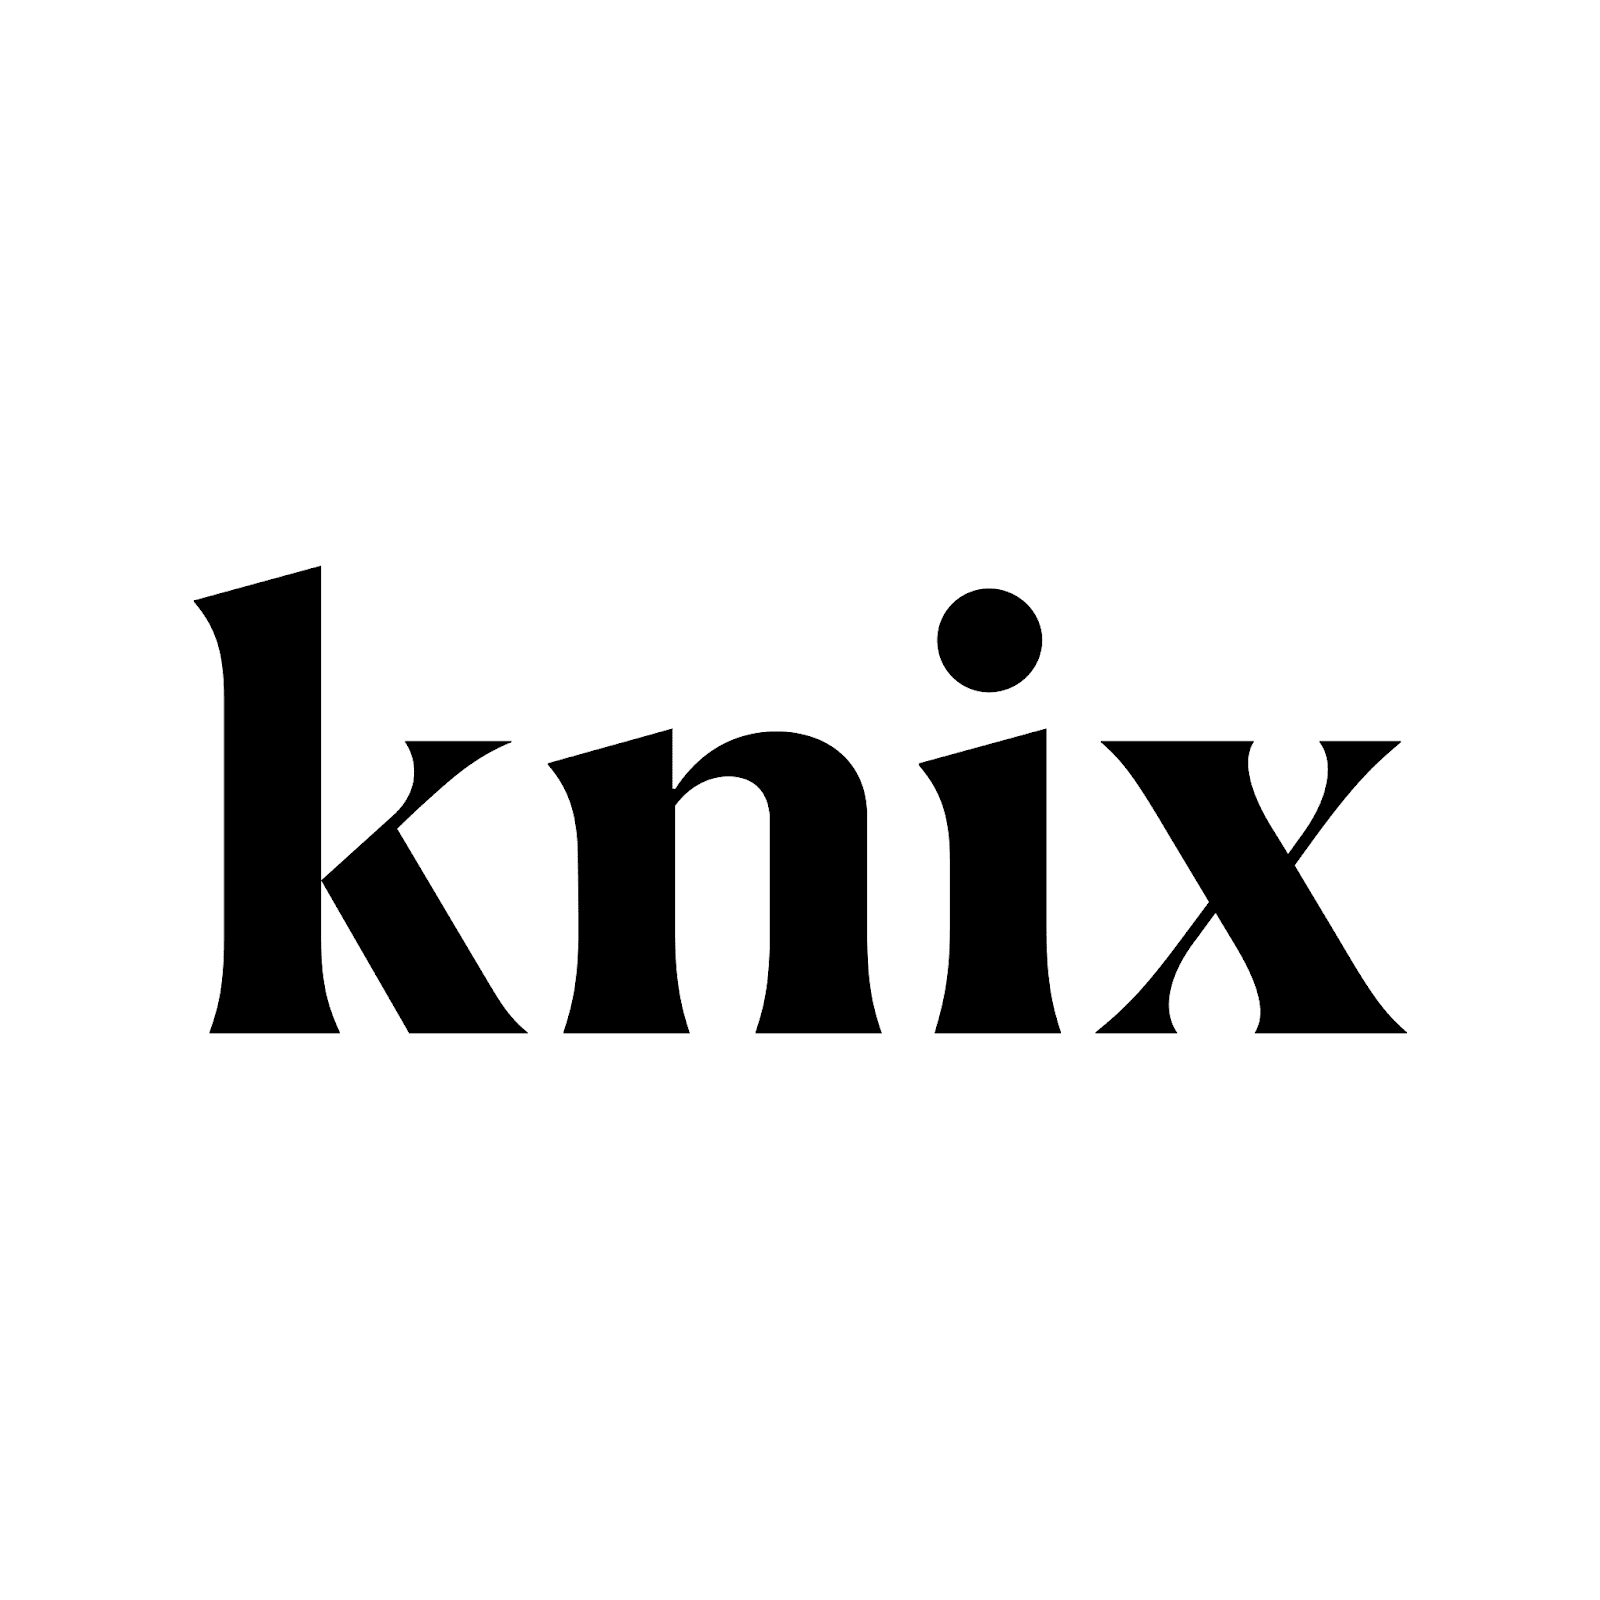 Joanna Griffiths on LinkedIn: Ten years ago, we launched Knix. It